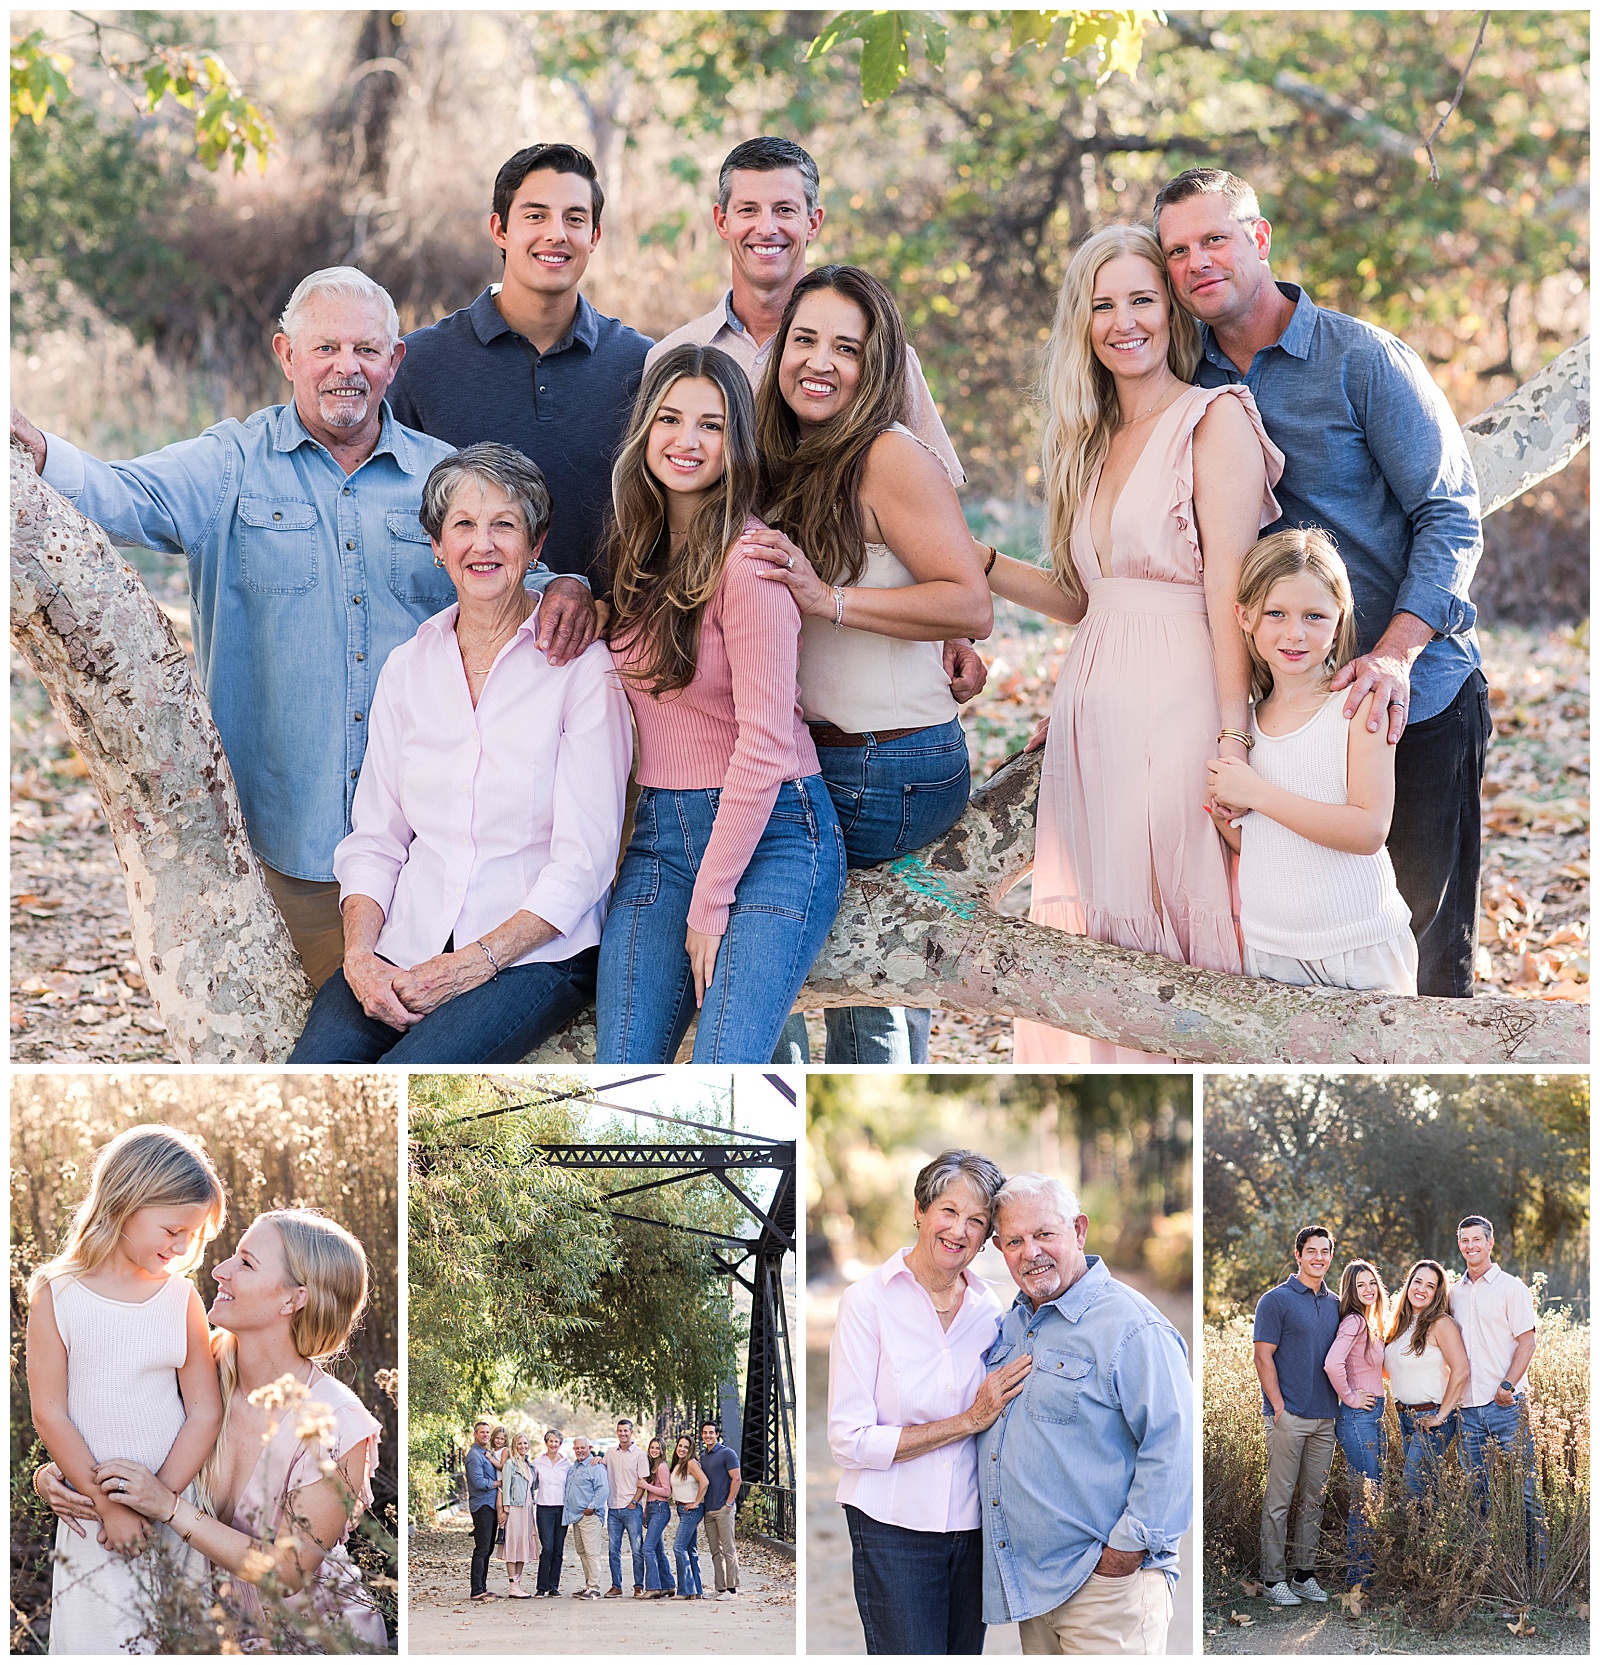 Sweetwater River Bridge Family Photography Session